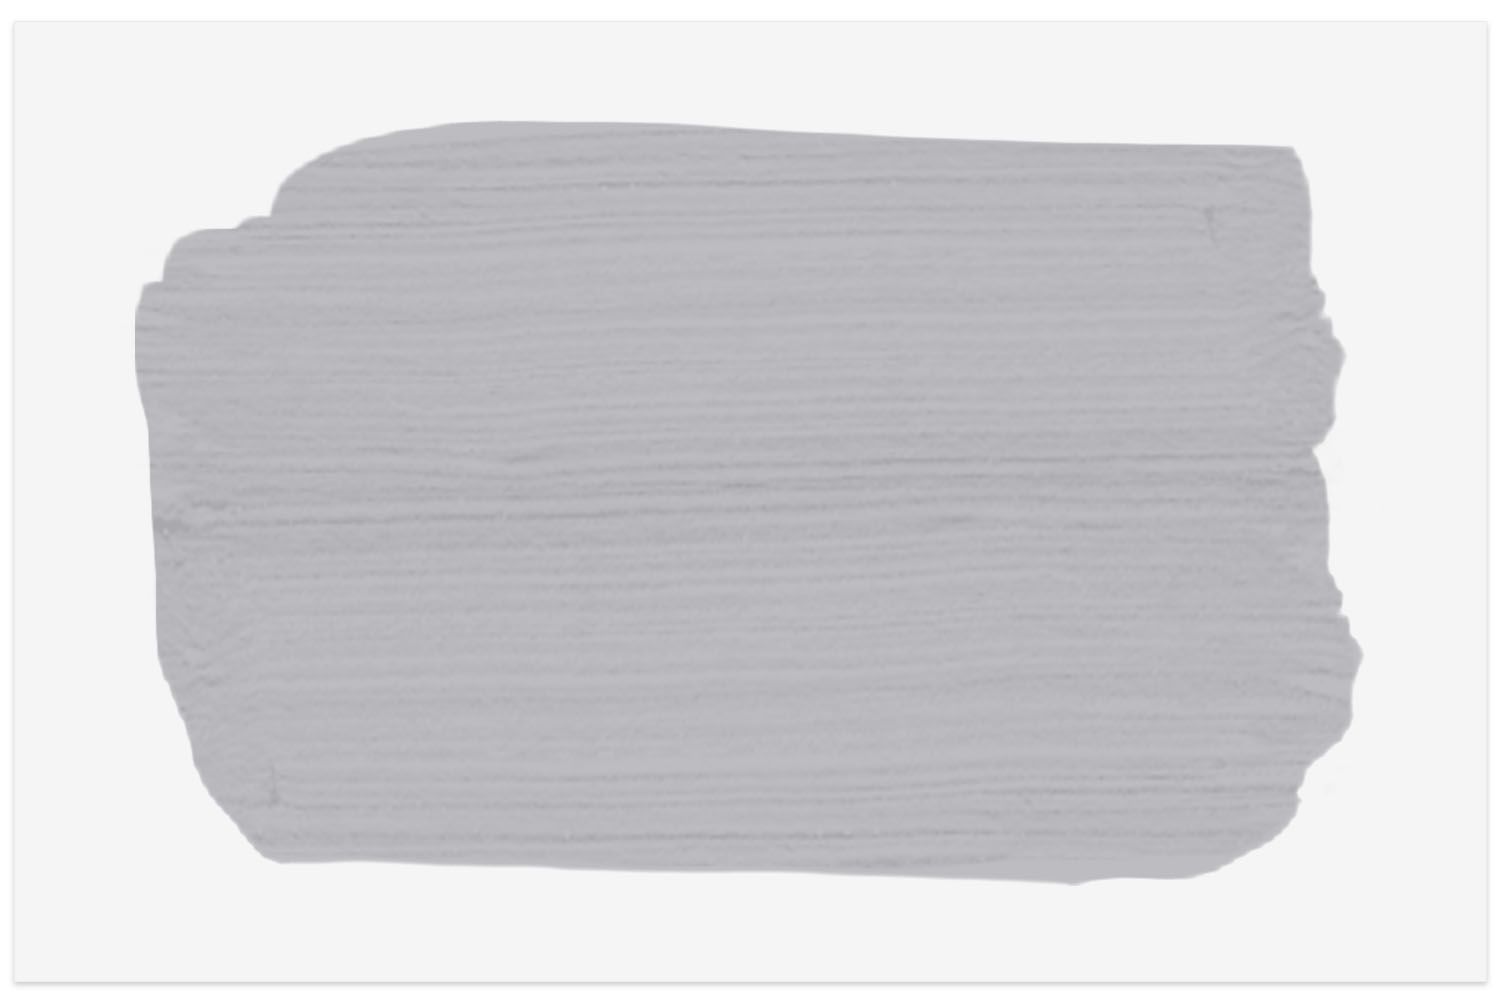 Clare Wink paint swatch